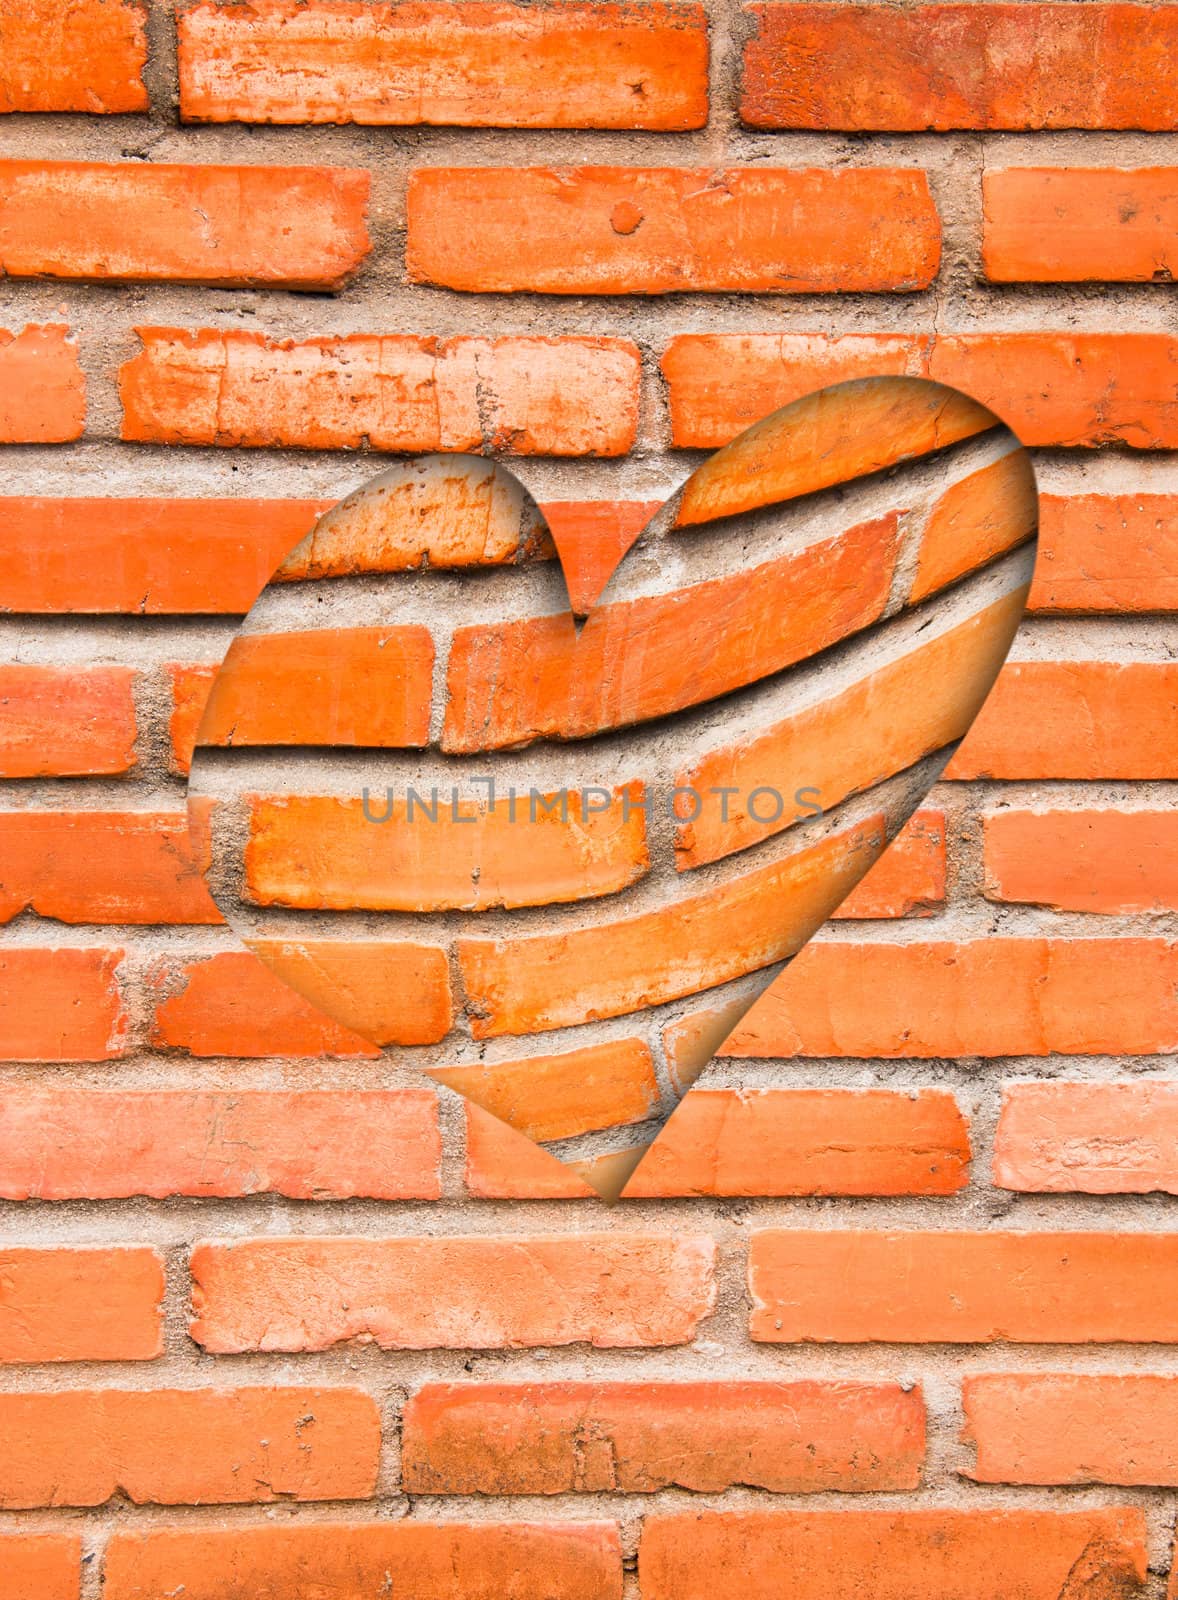 Brick walls of the heart. by Theeraphon